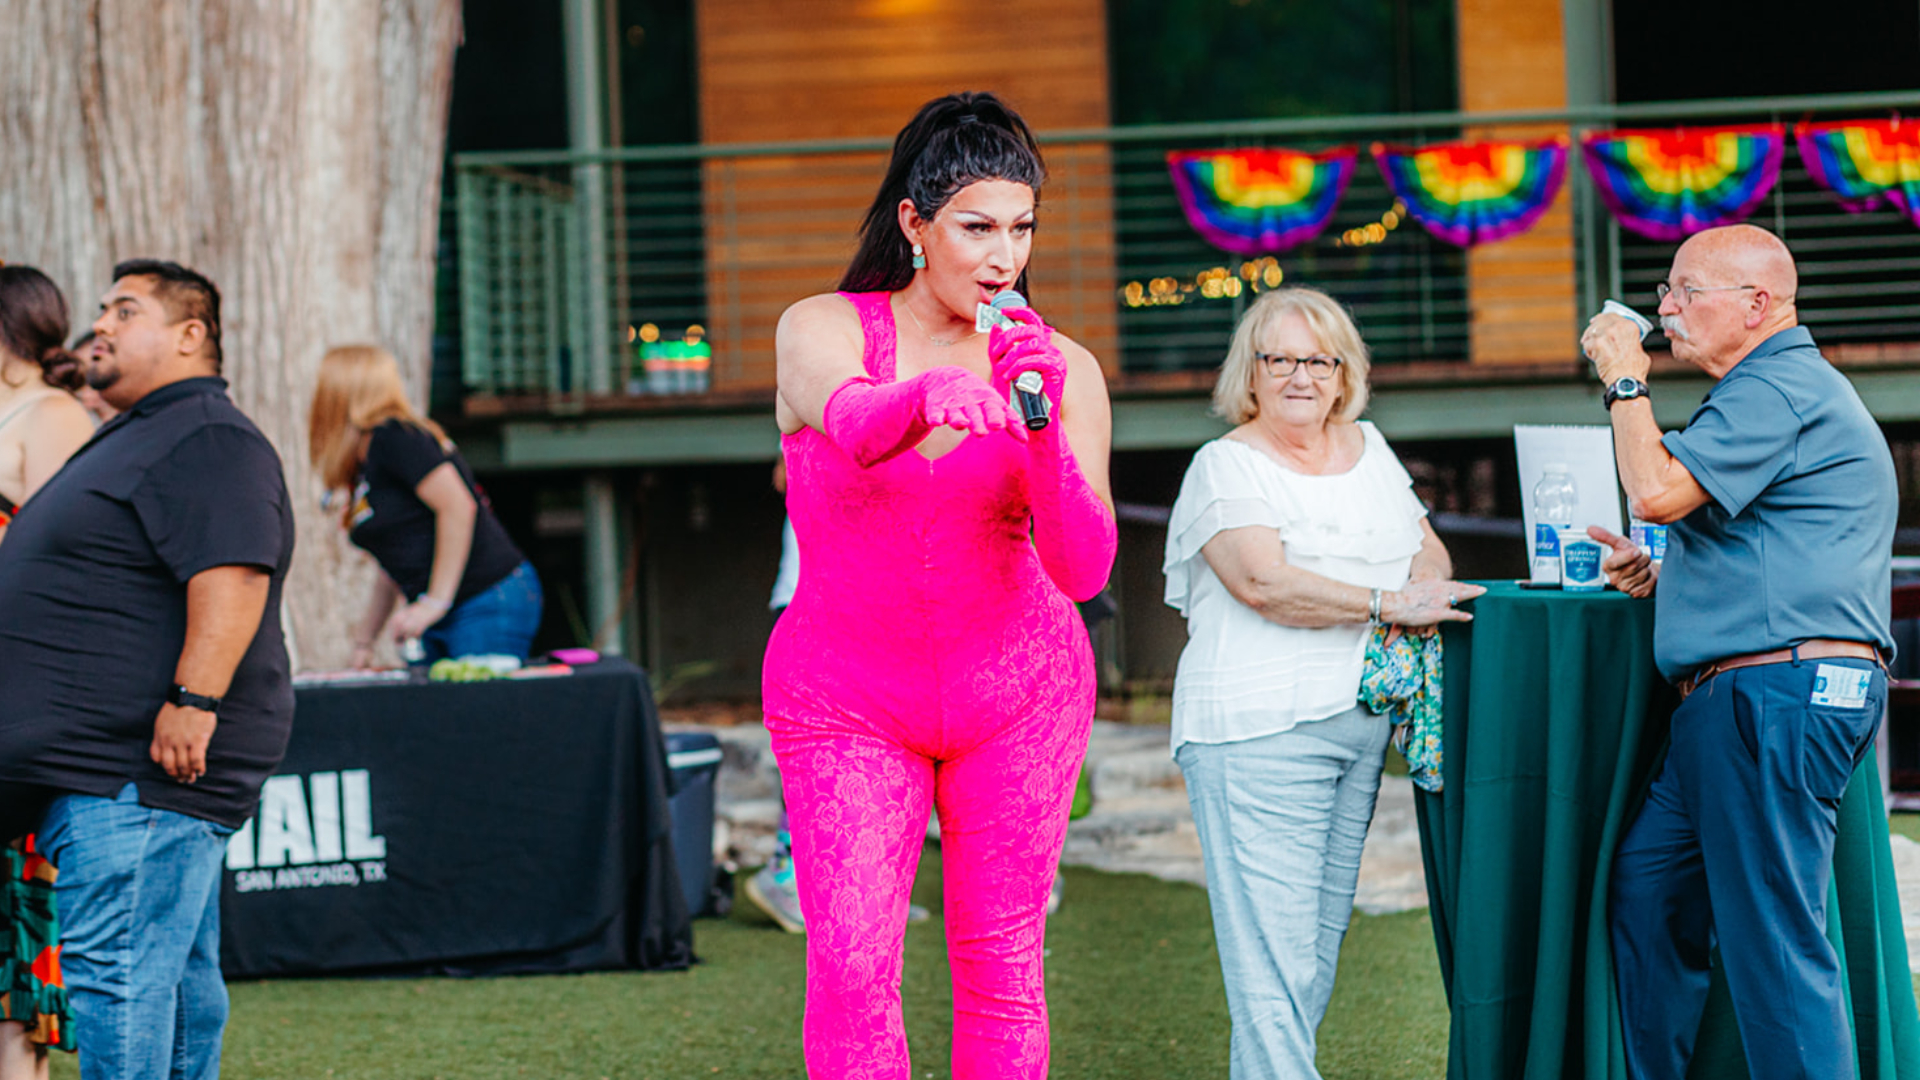 Drag queen in pink jumpsuit with high ponytail holding microphone outside on the lawn. Elderly couple stands behind, sipping cocktails. Pride flags hung along the balcony railing in the background.